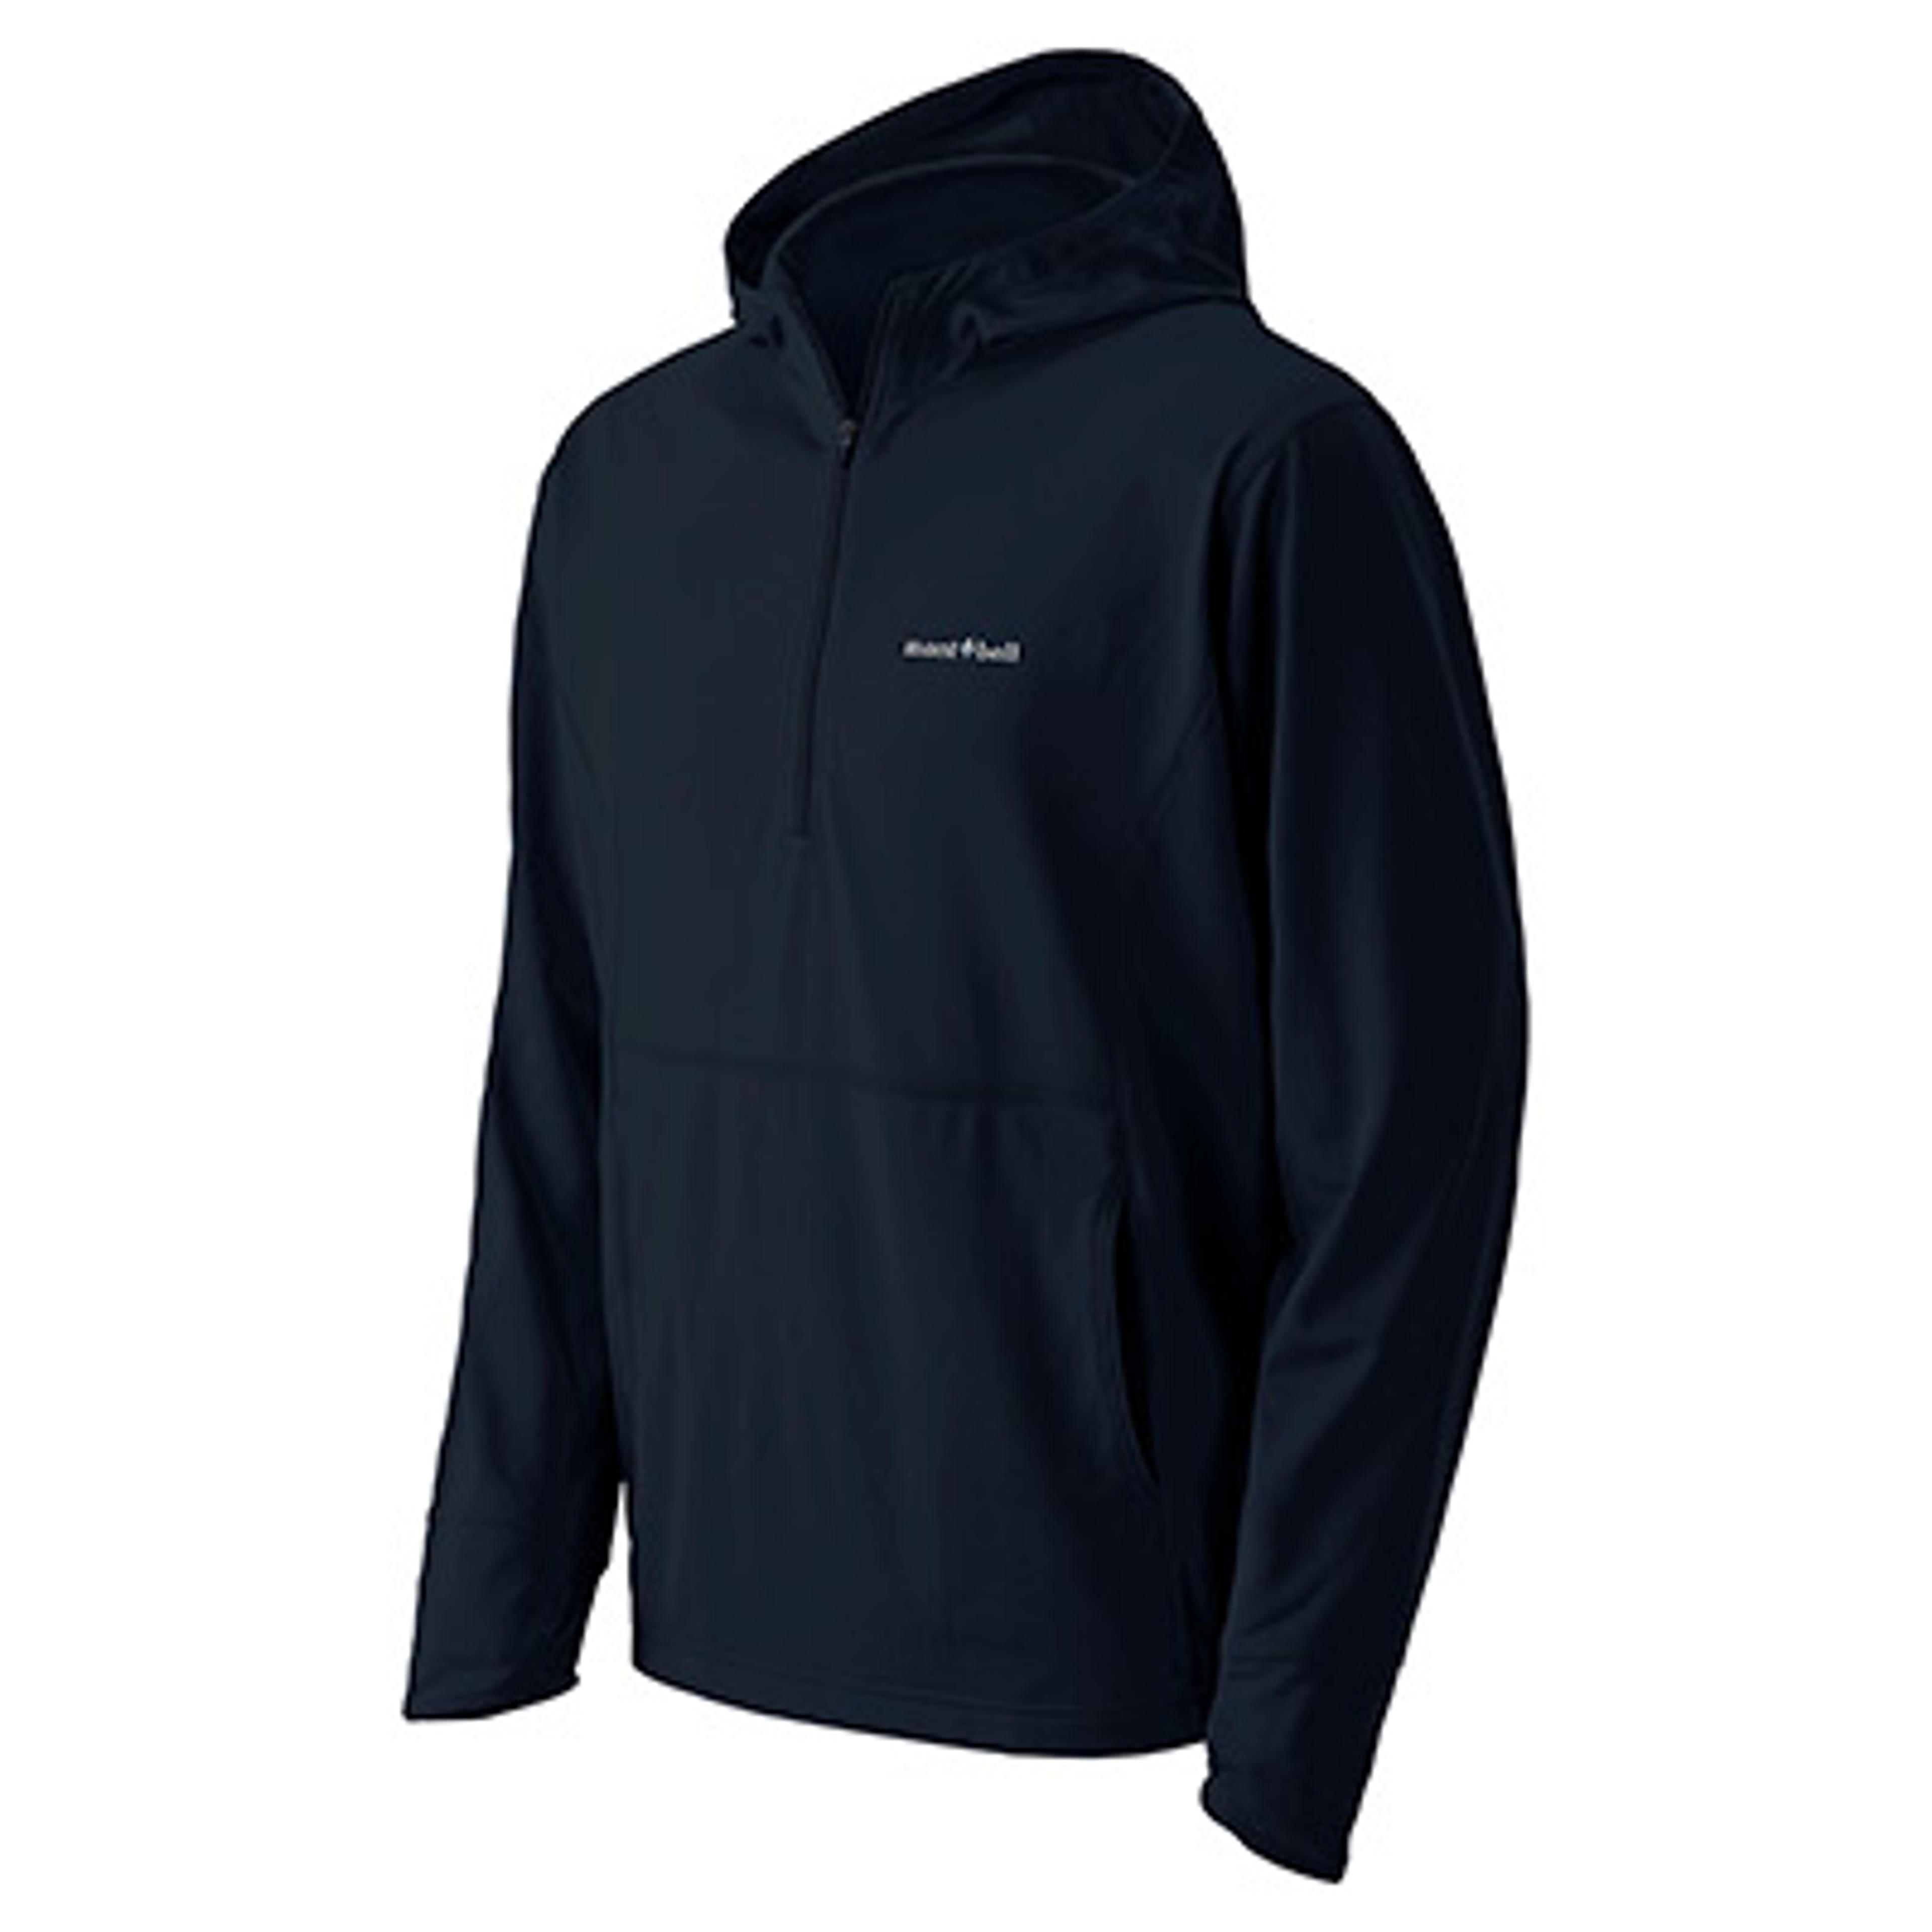 Cool Hoodie Men's (Closeout)